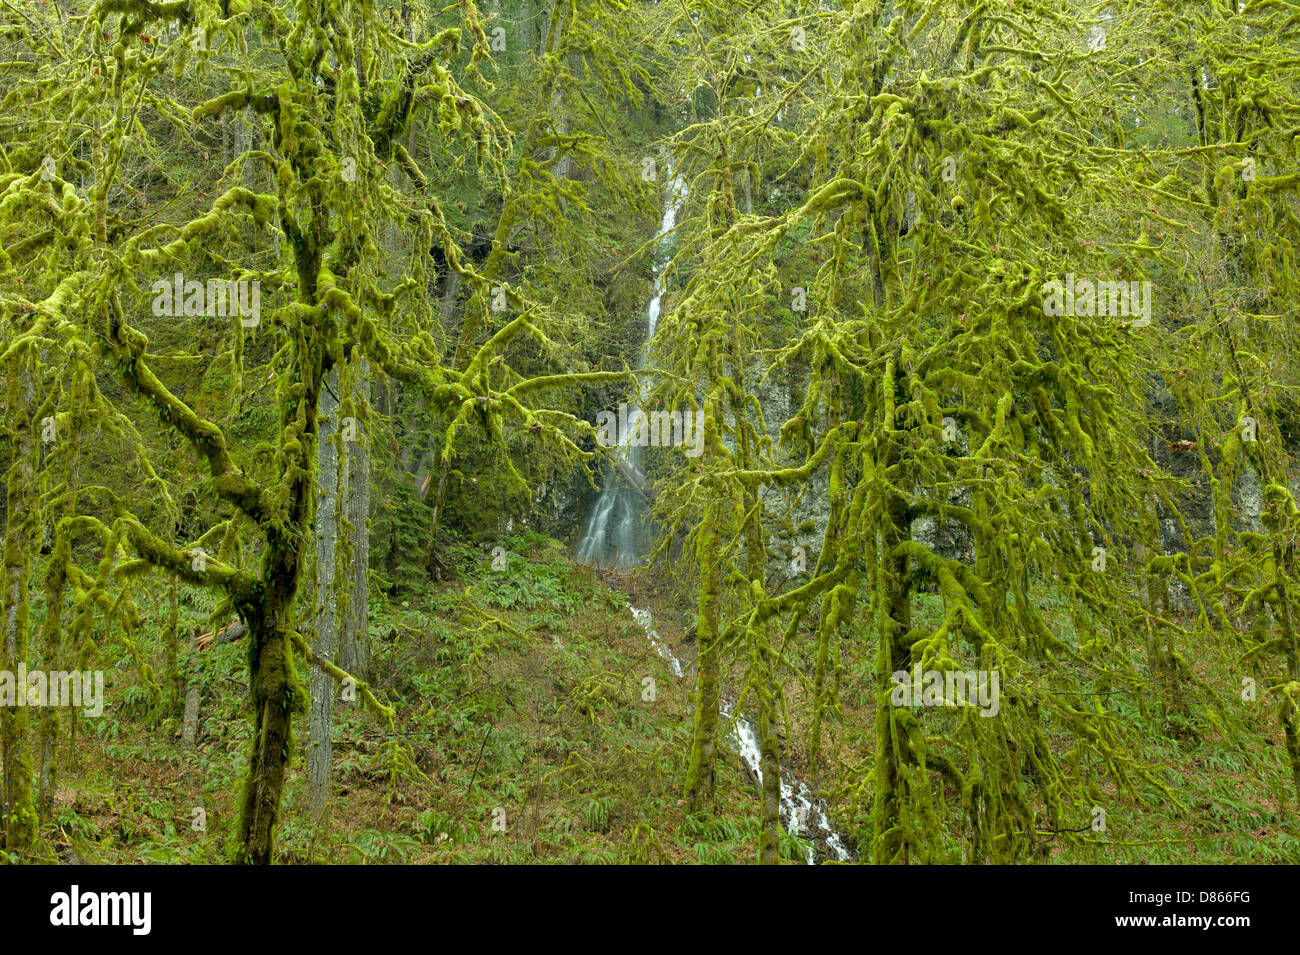 Moss covered Big Leaf Maple trees and seasonal waterfal. Silver Falls State Park, Oregon Stock Photo